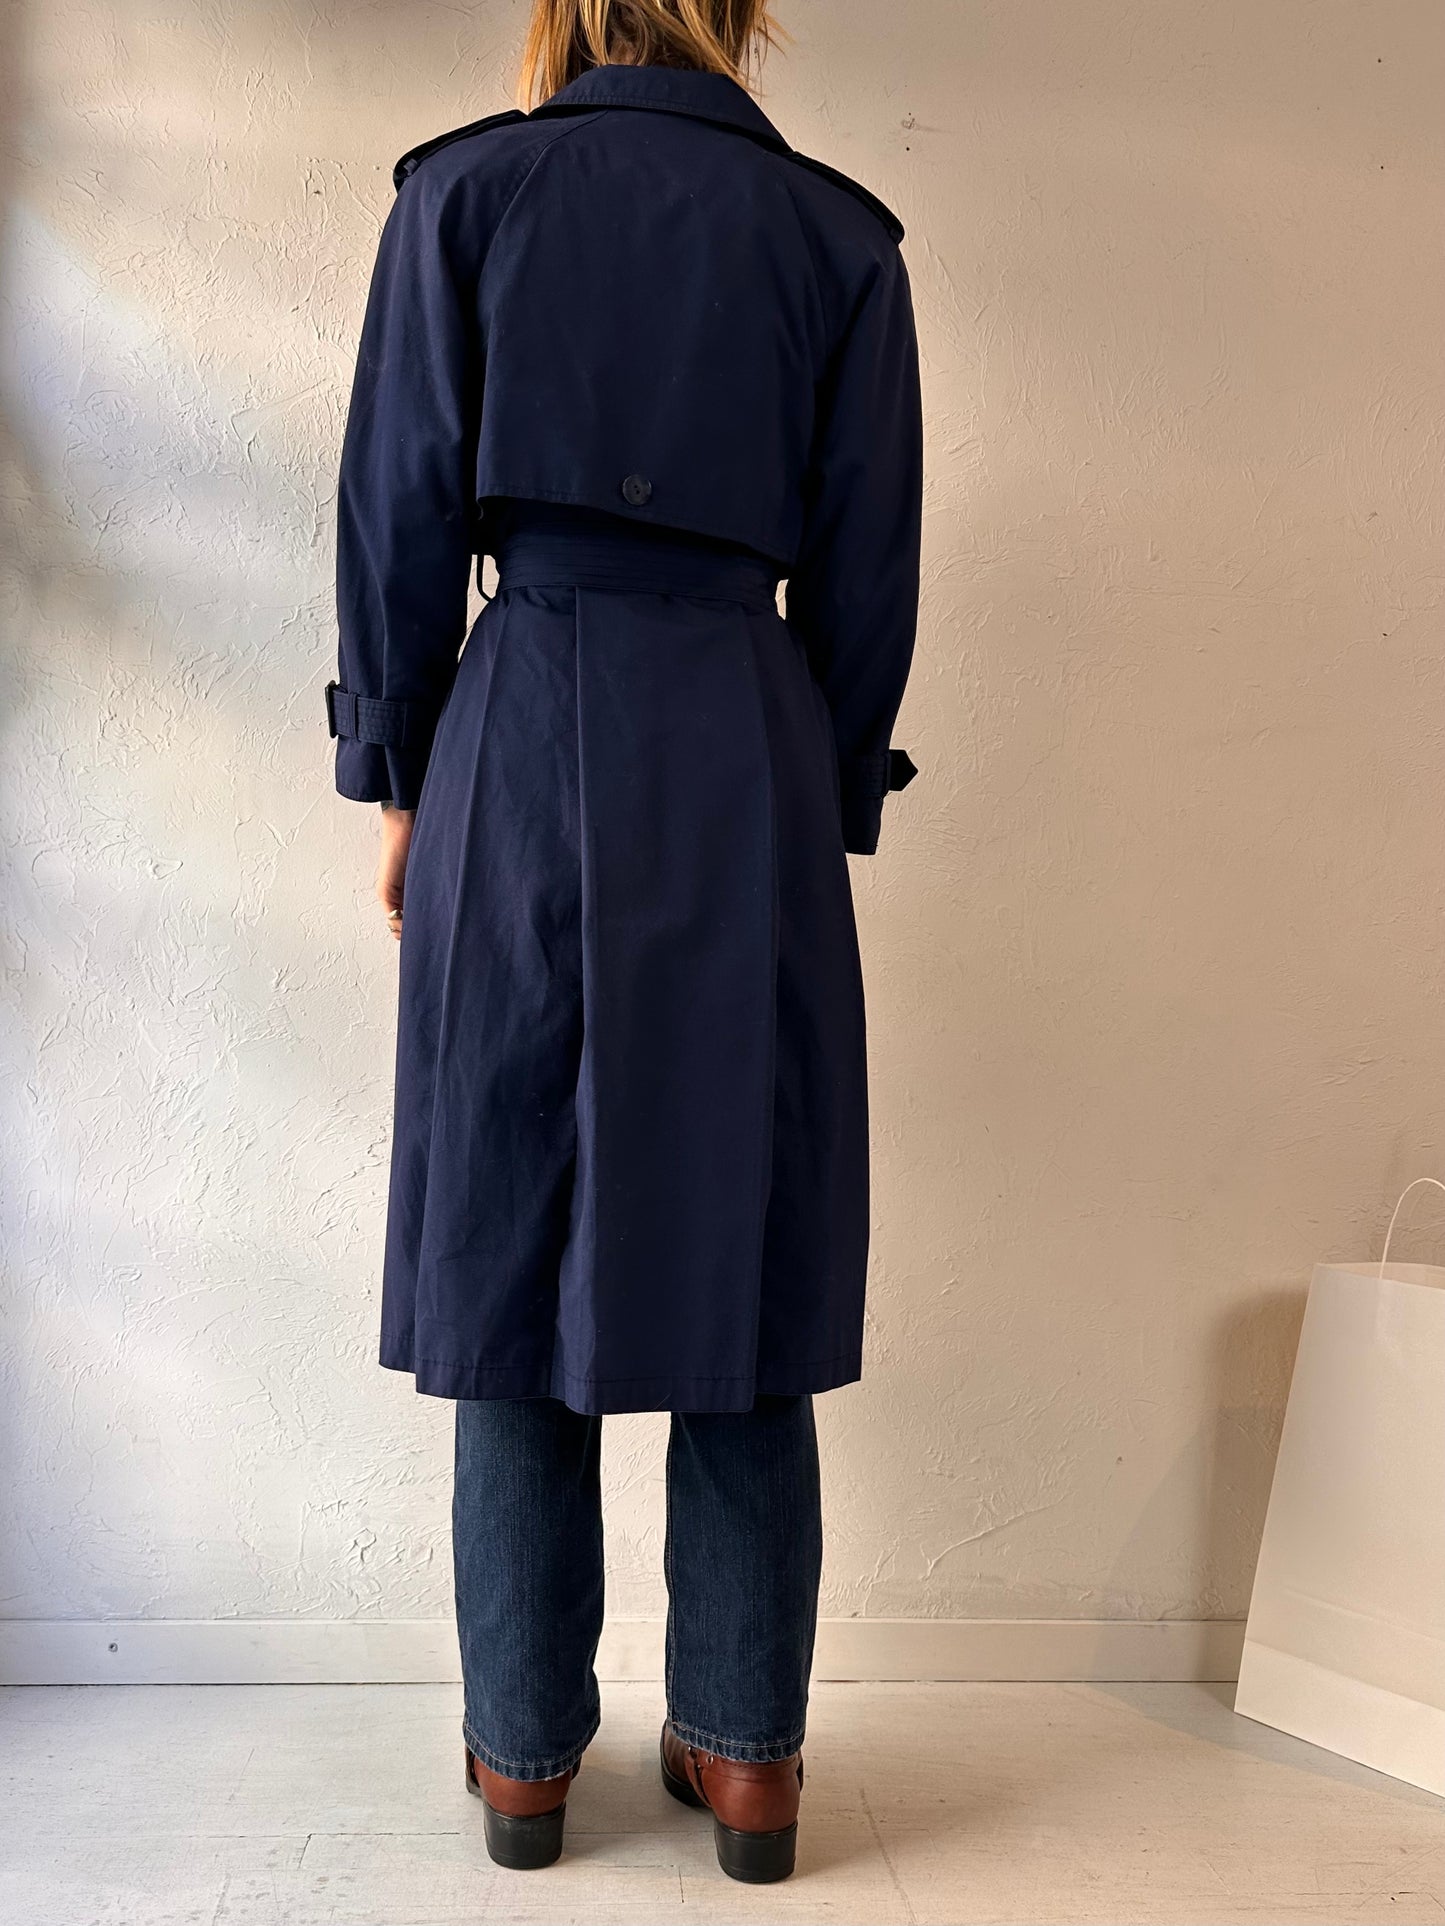 Vintage 'London Towne' Blue Classic Trench Coat / Small